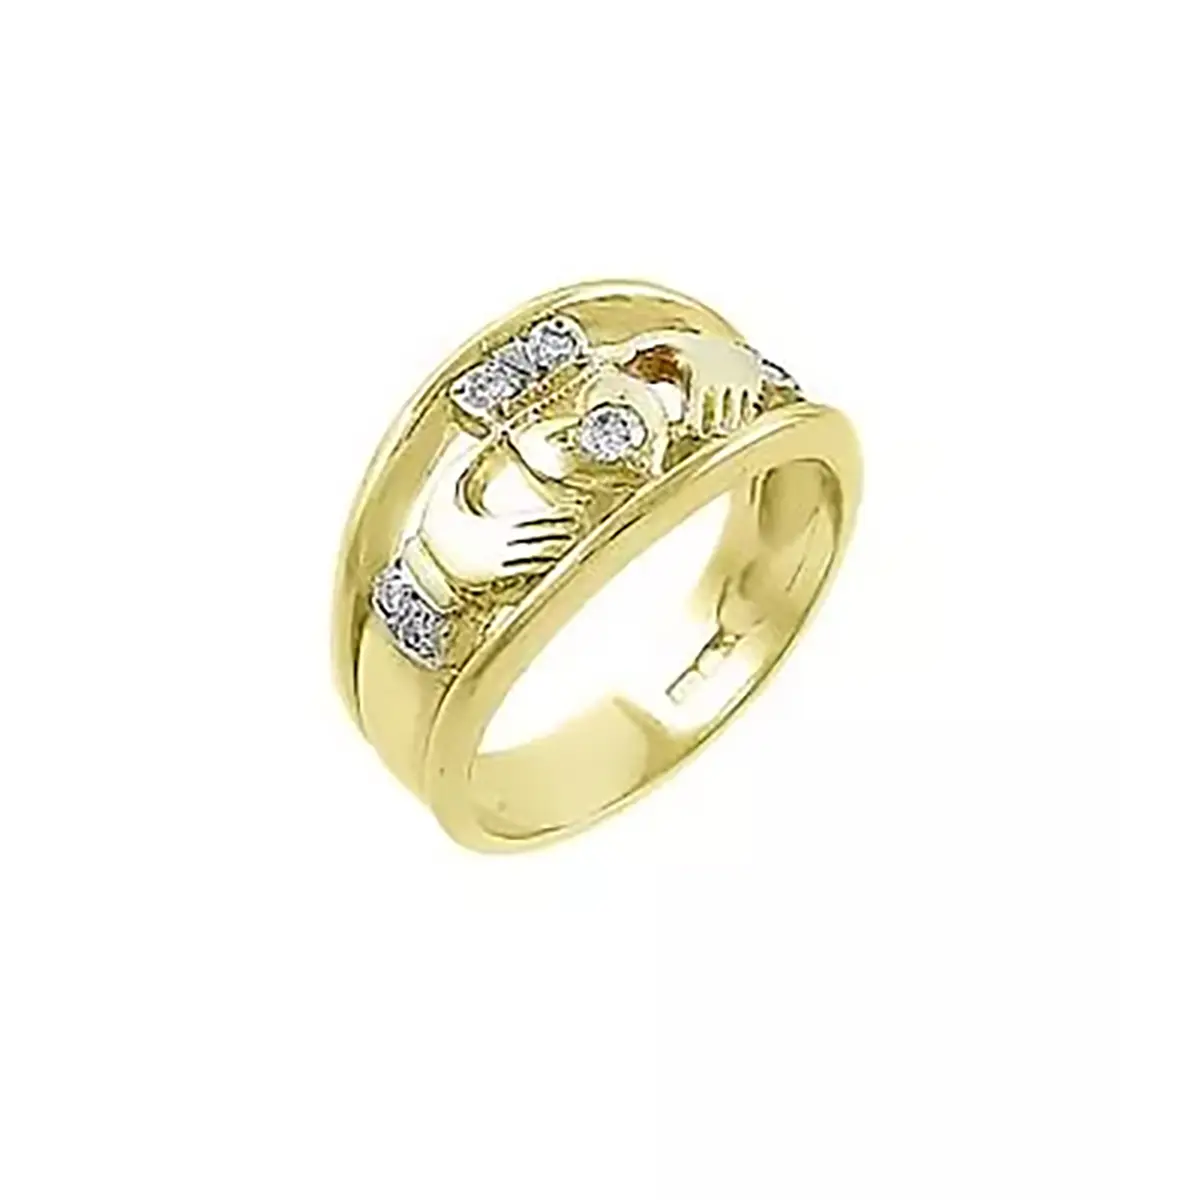 Gold Claddagh Wide Ring With Diamonds ...